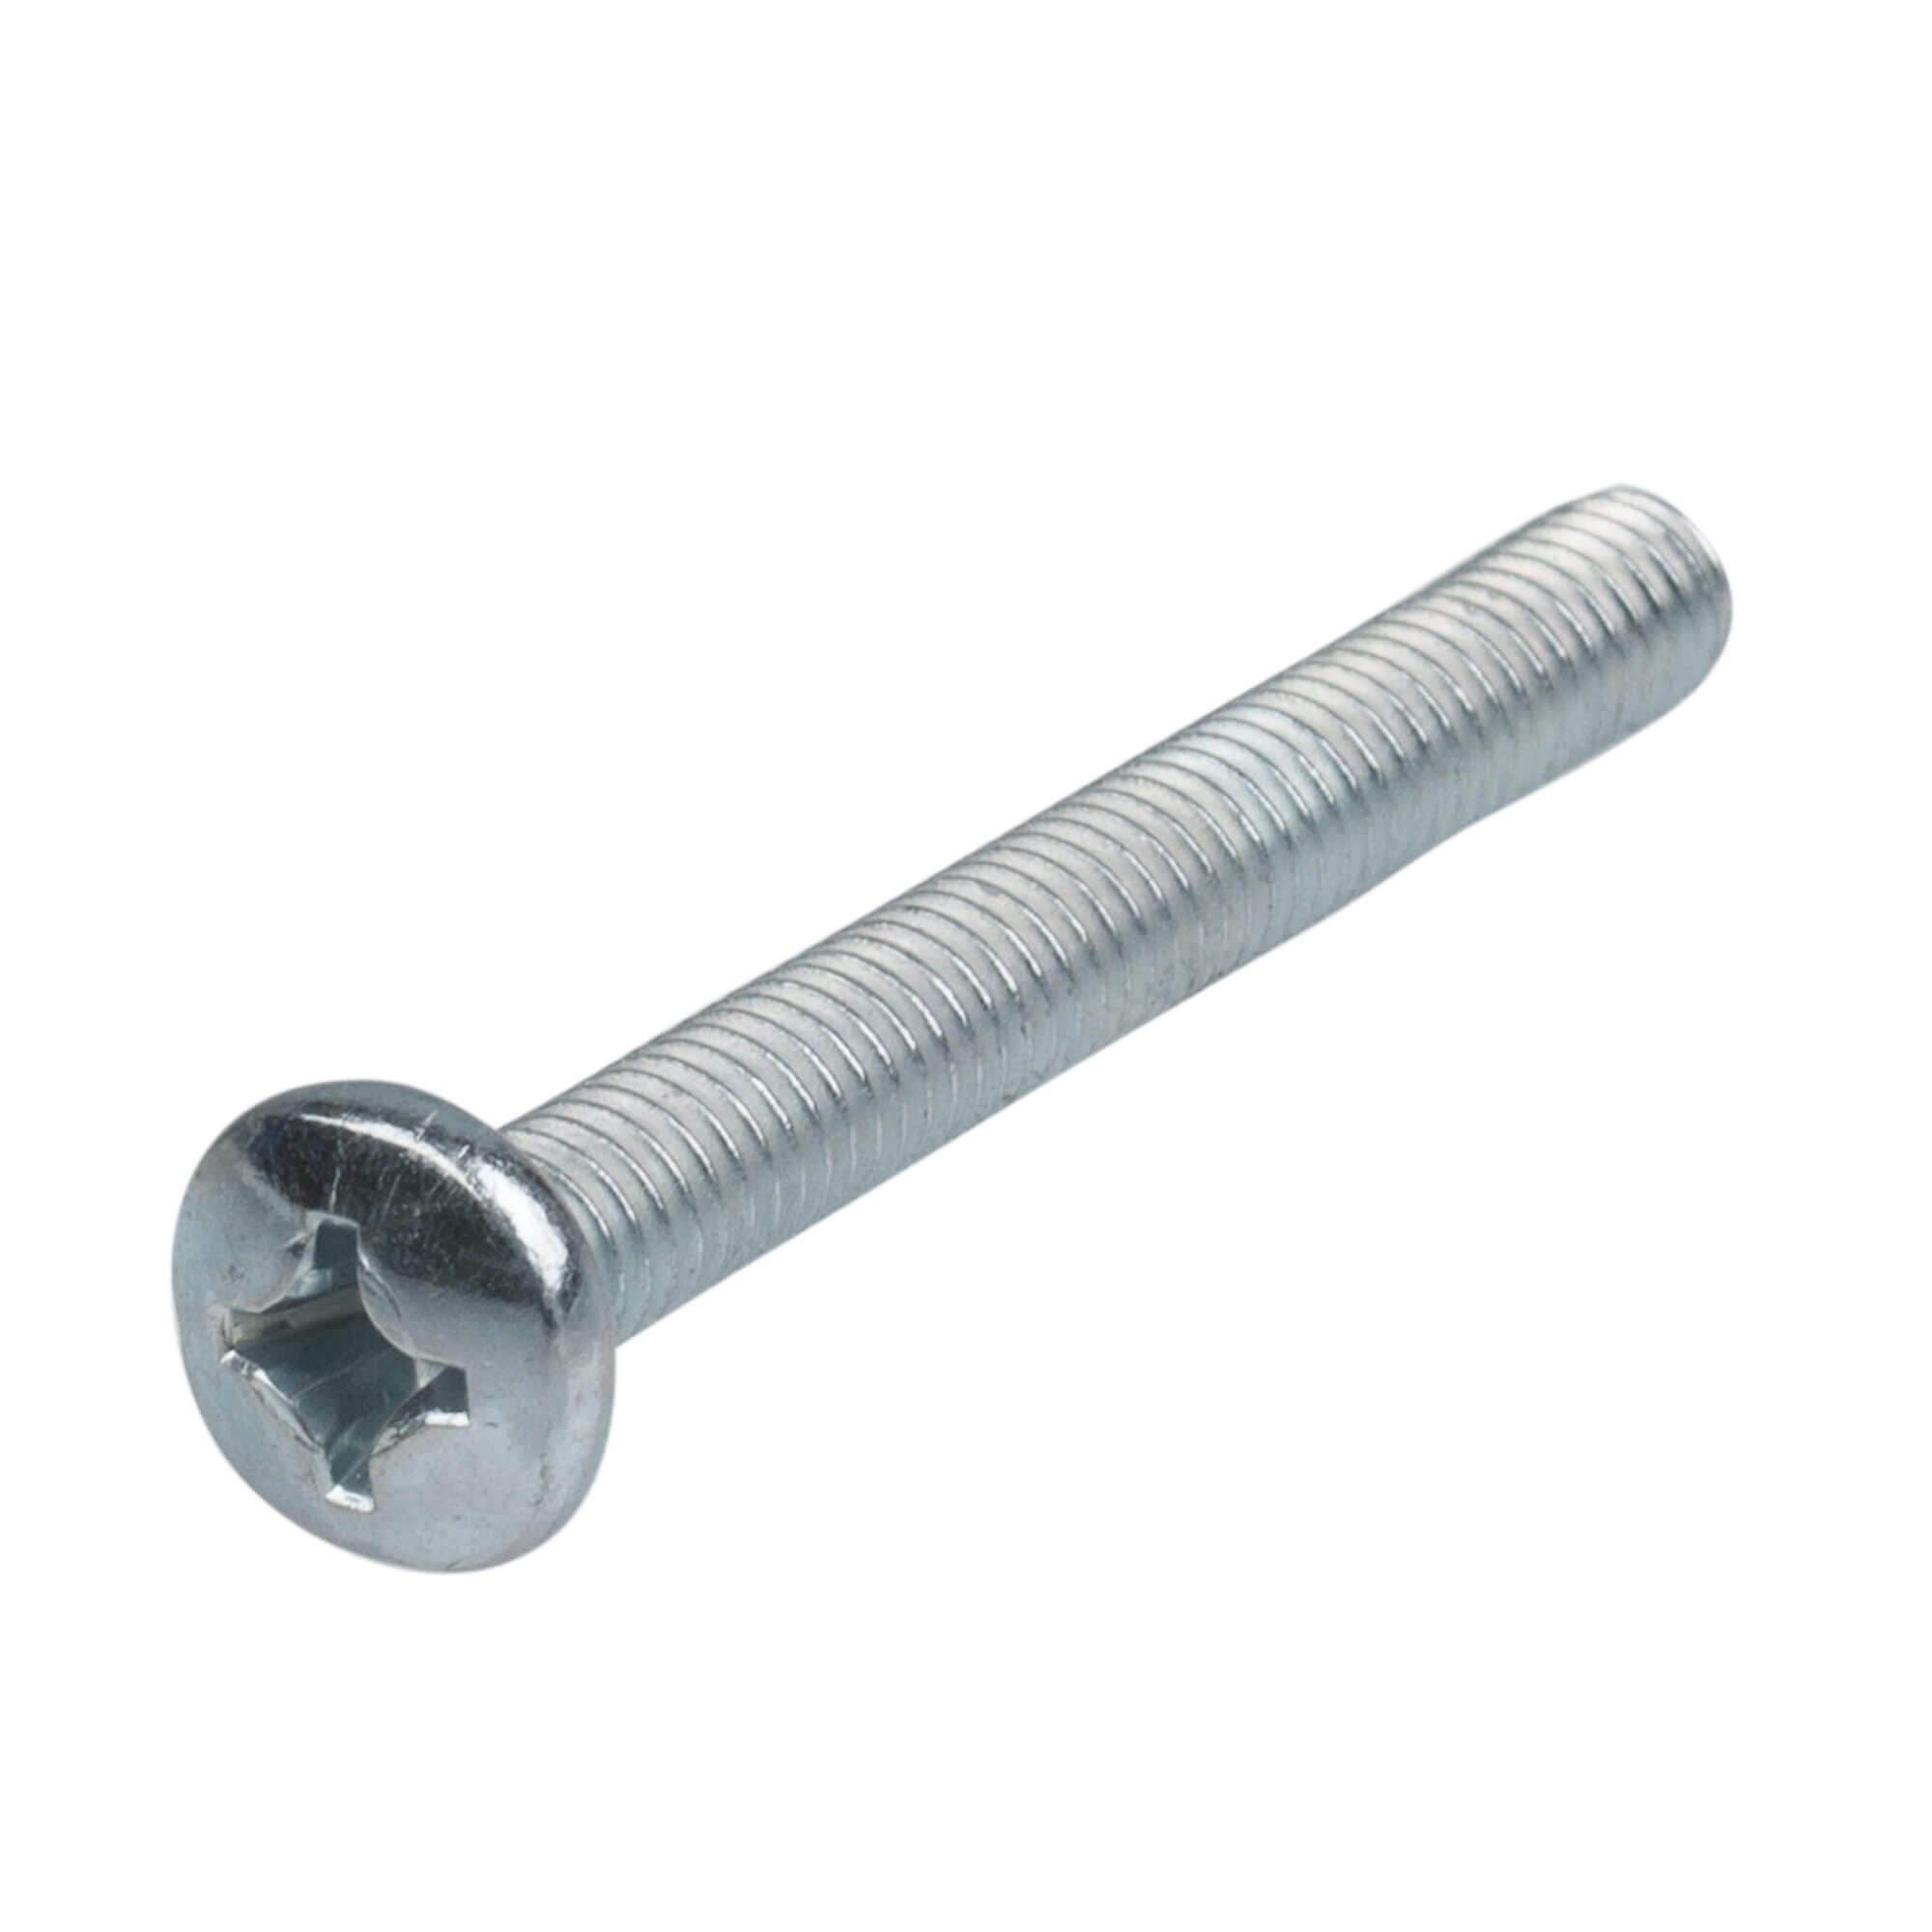 Cancan YSB M6x50 bolt - spare part for Cancan manual juicer